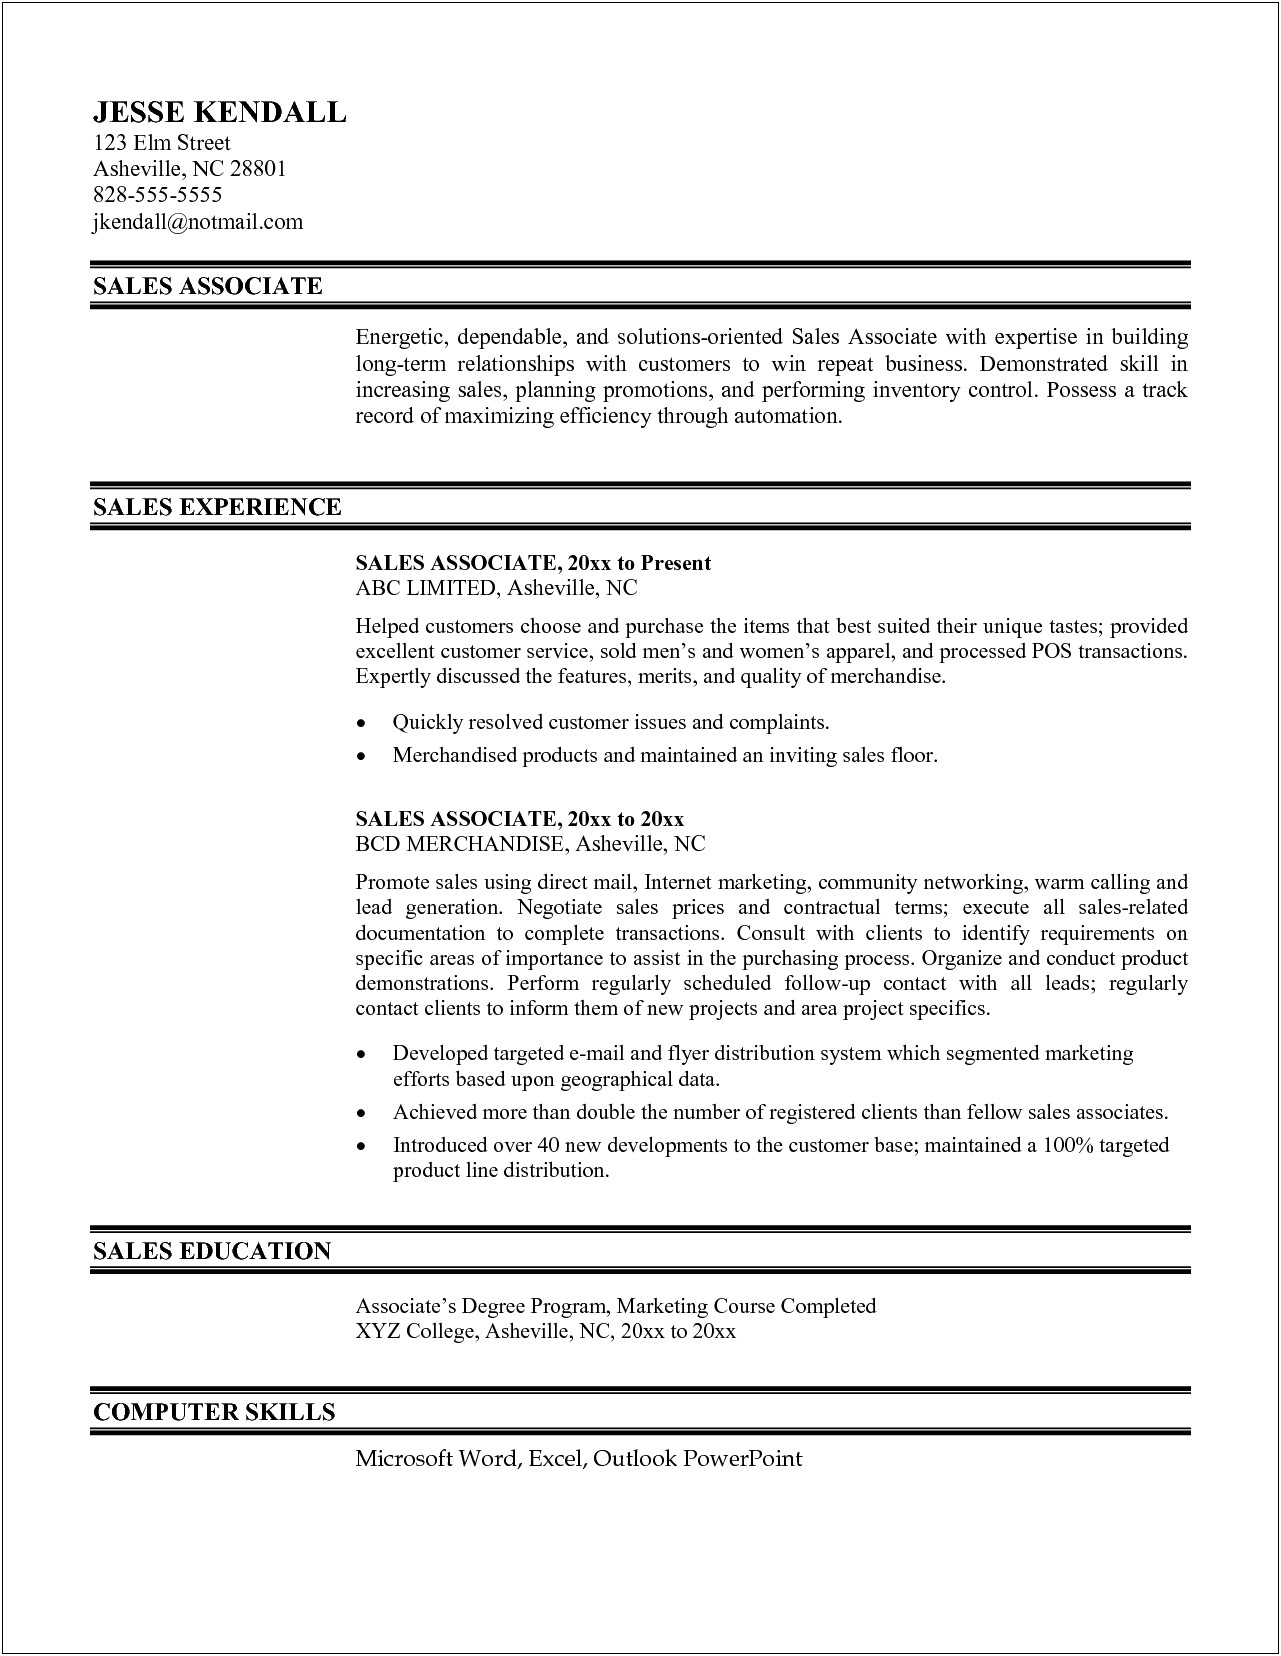 Resume For Sales Associate Objective